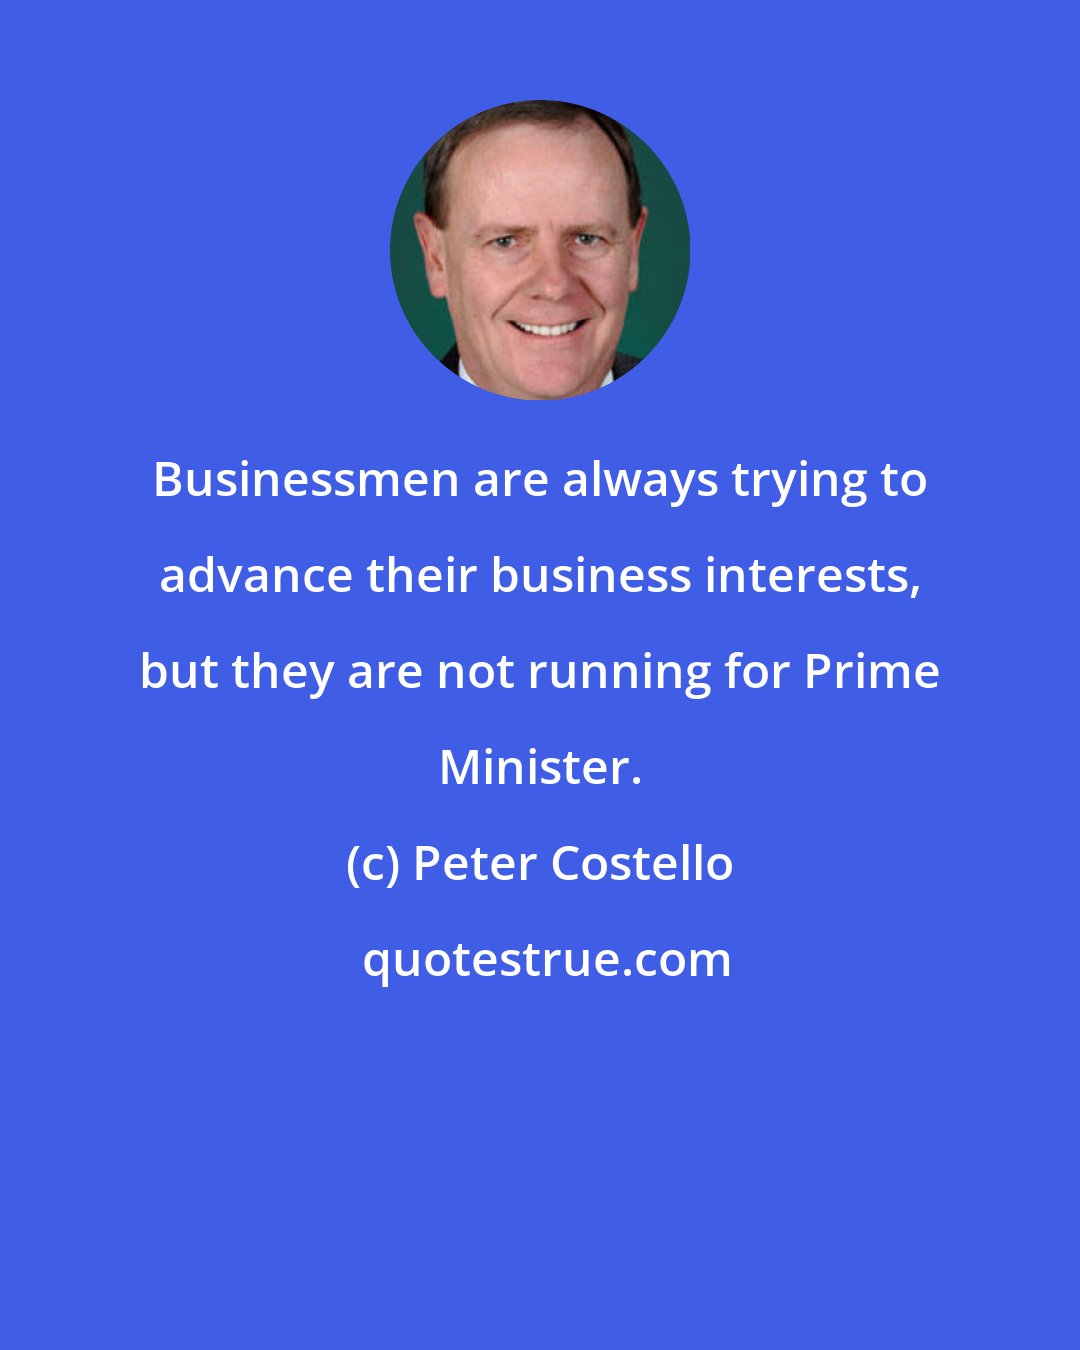 Peter Costello: Businessmen are always trying to advance their business interests, but they are not running for Prime Minister.